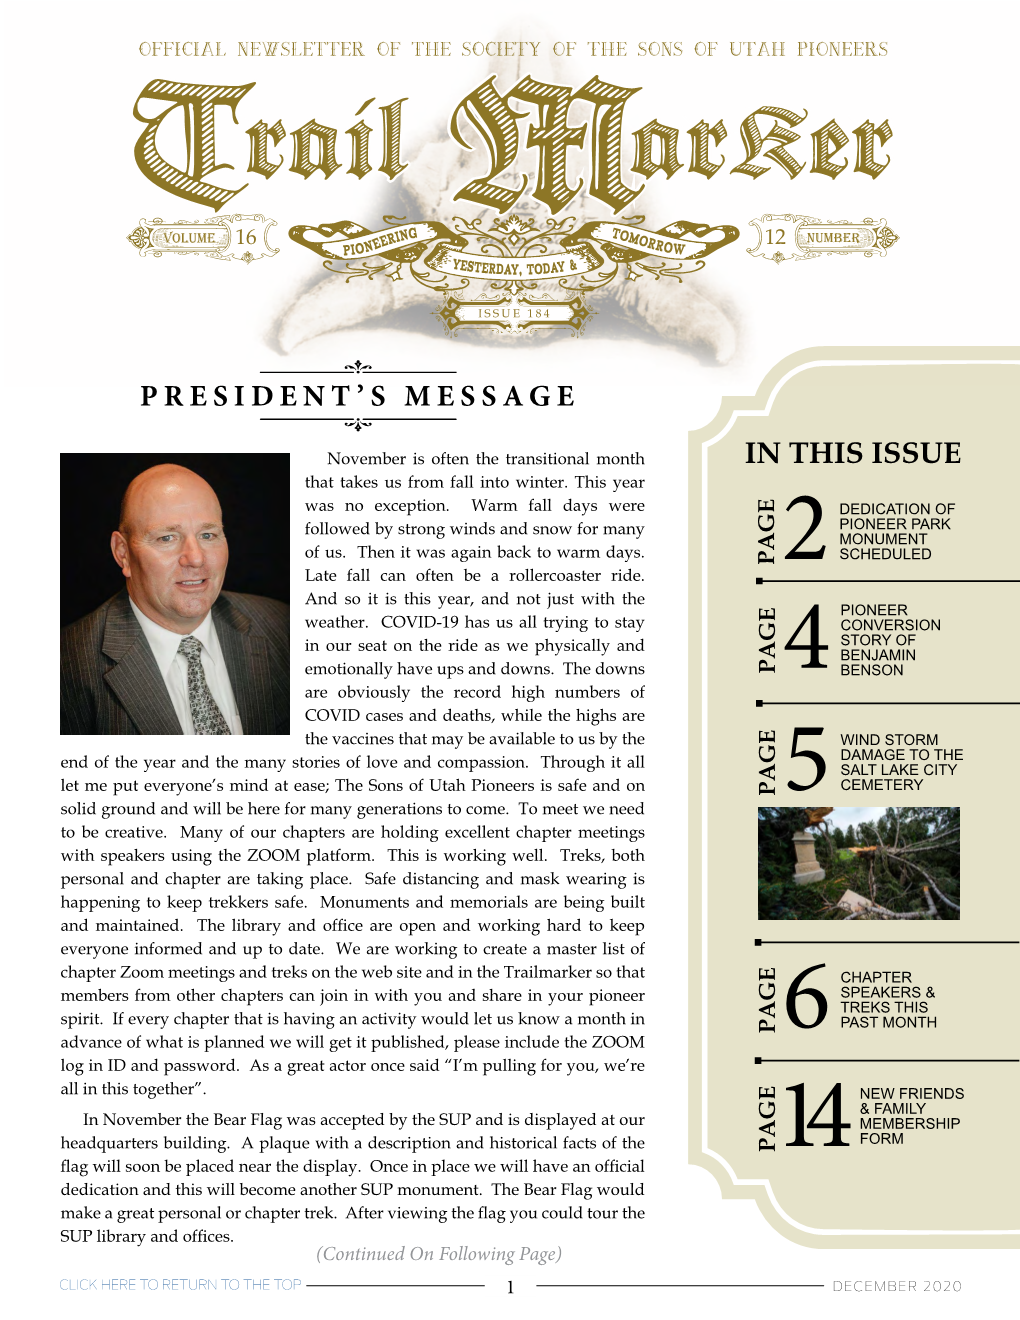 President's Message in This Issue